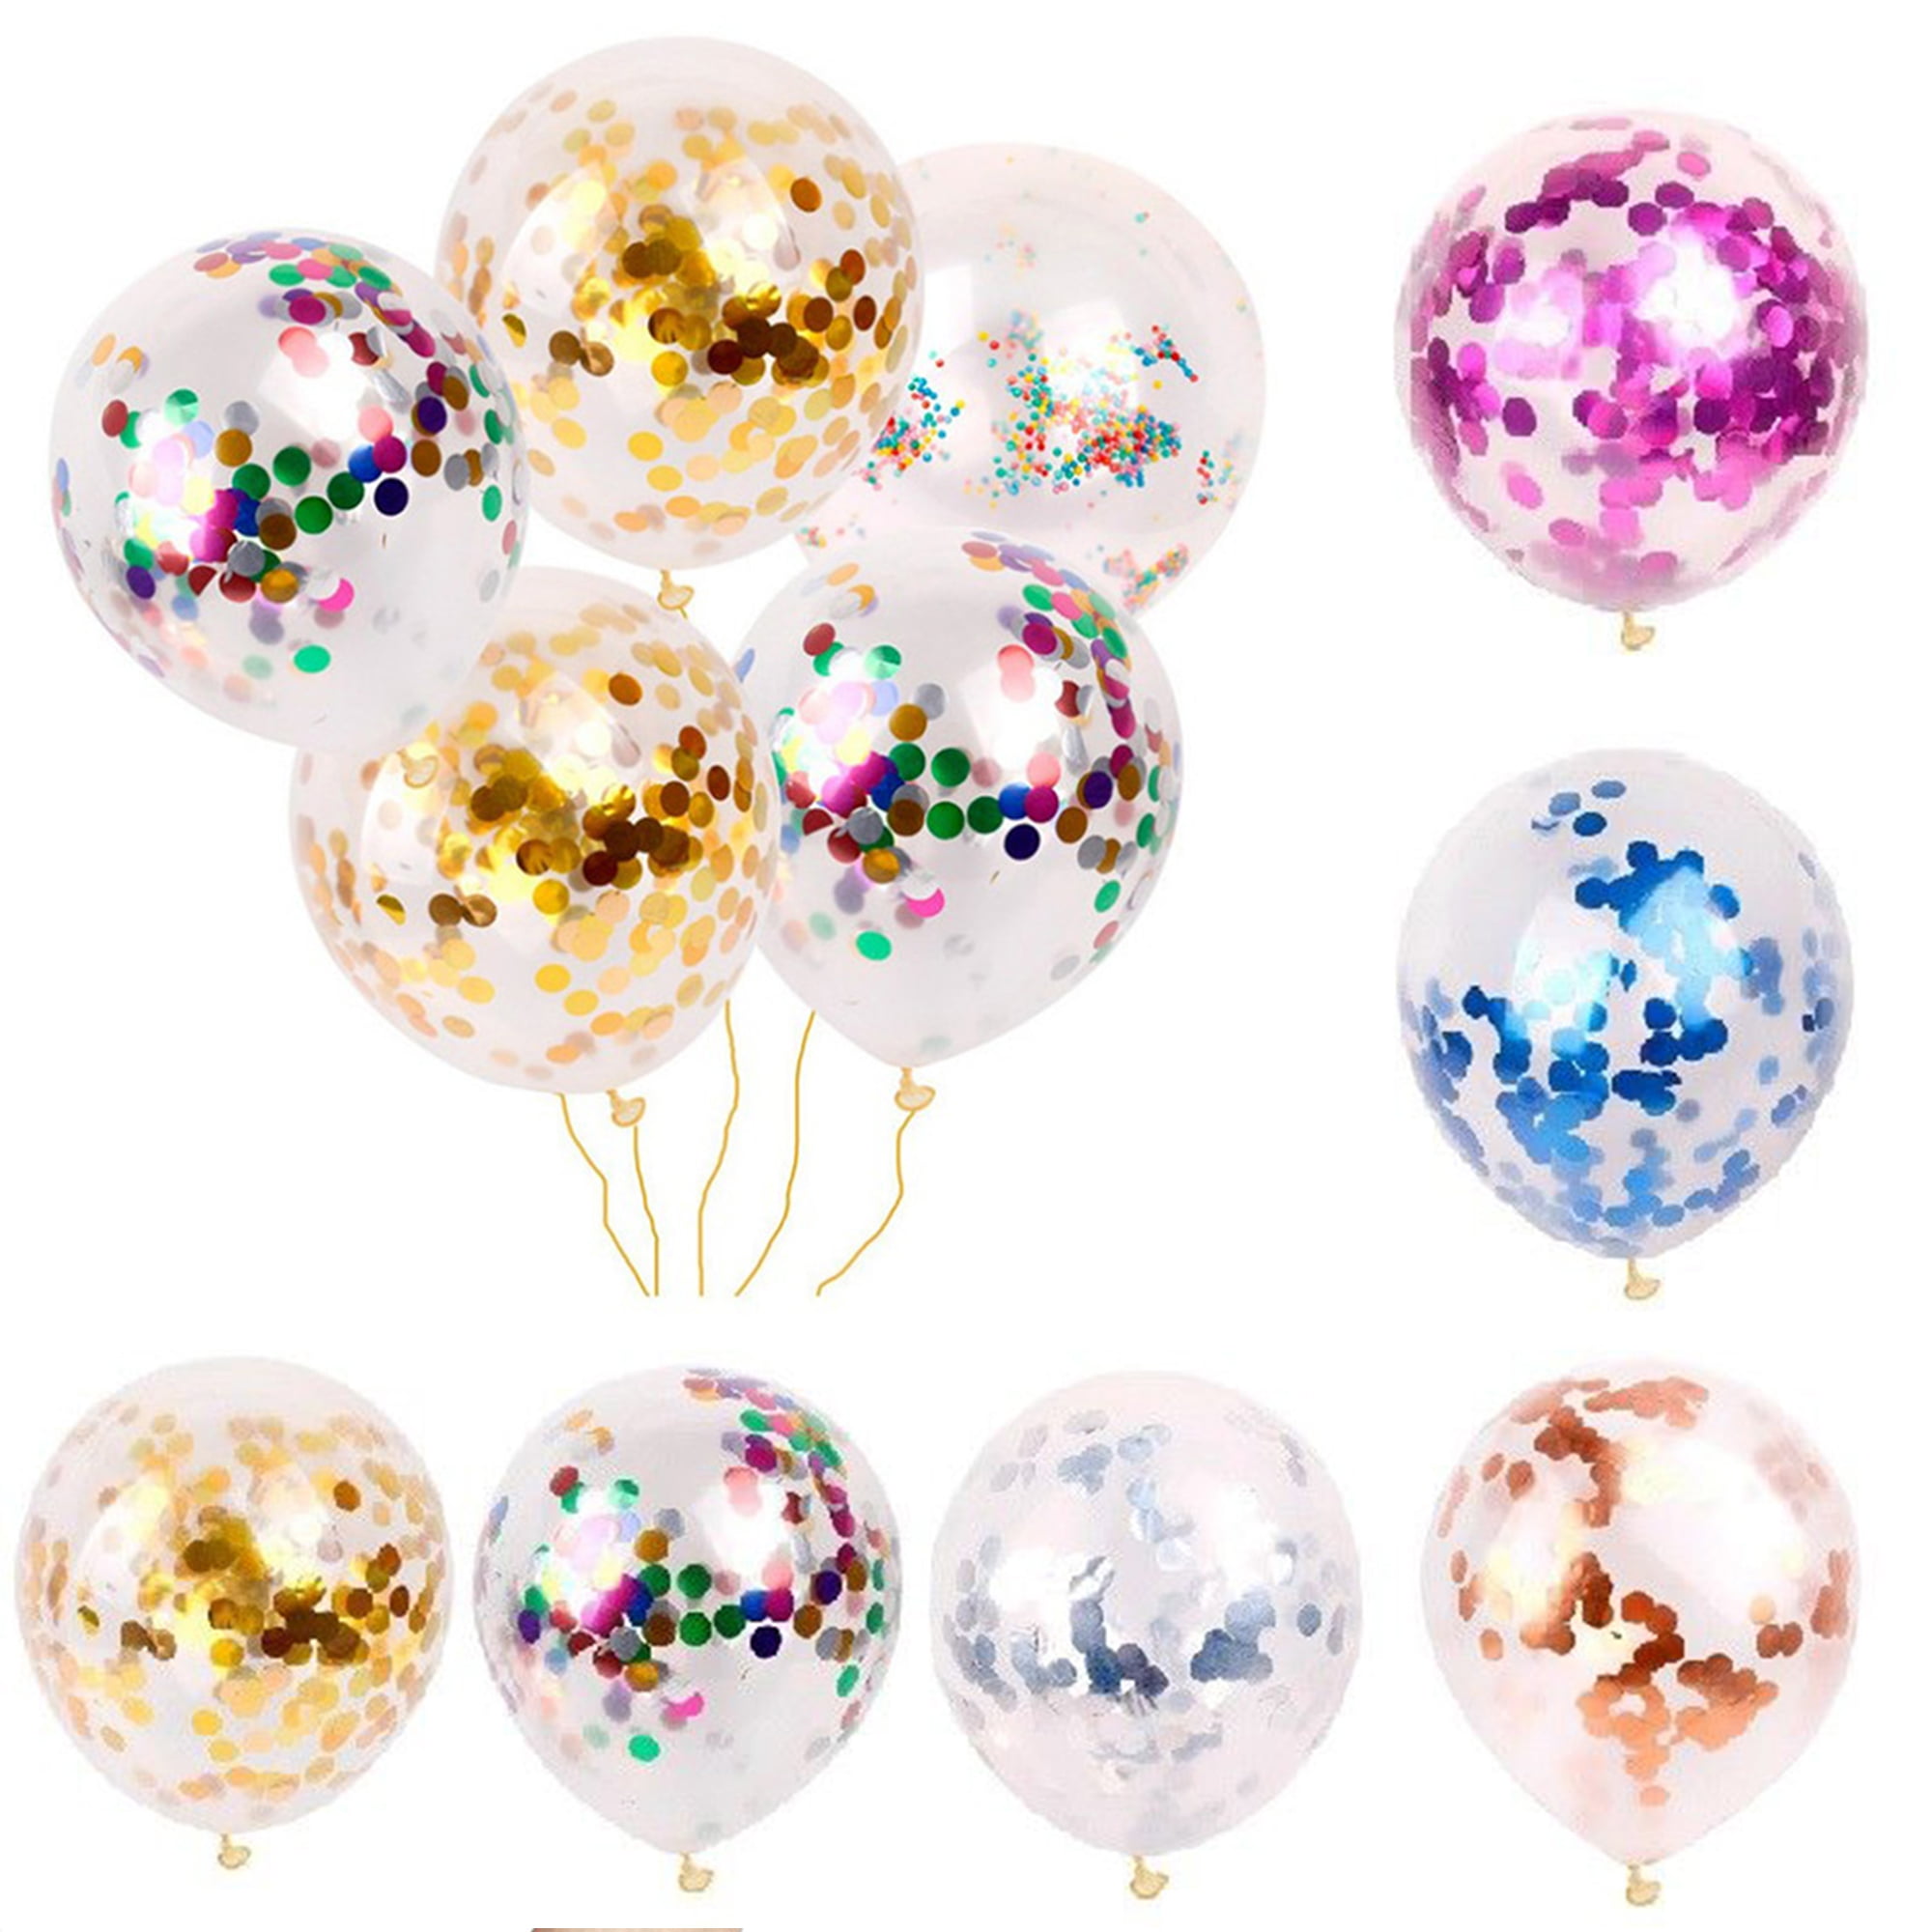 10pc 12inch Thick Metal Latex Balloons Wedding Balloon Birthday Party Decoration 